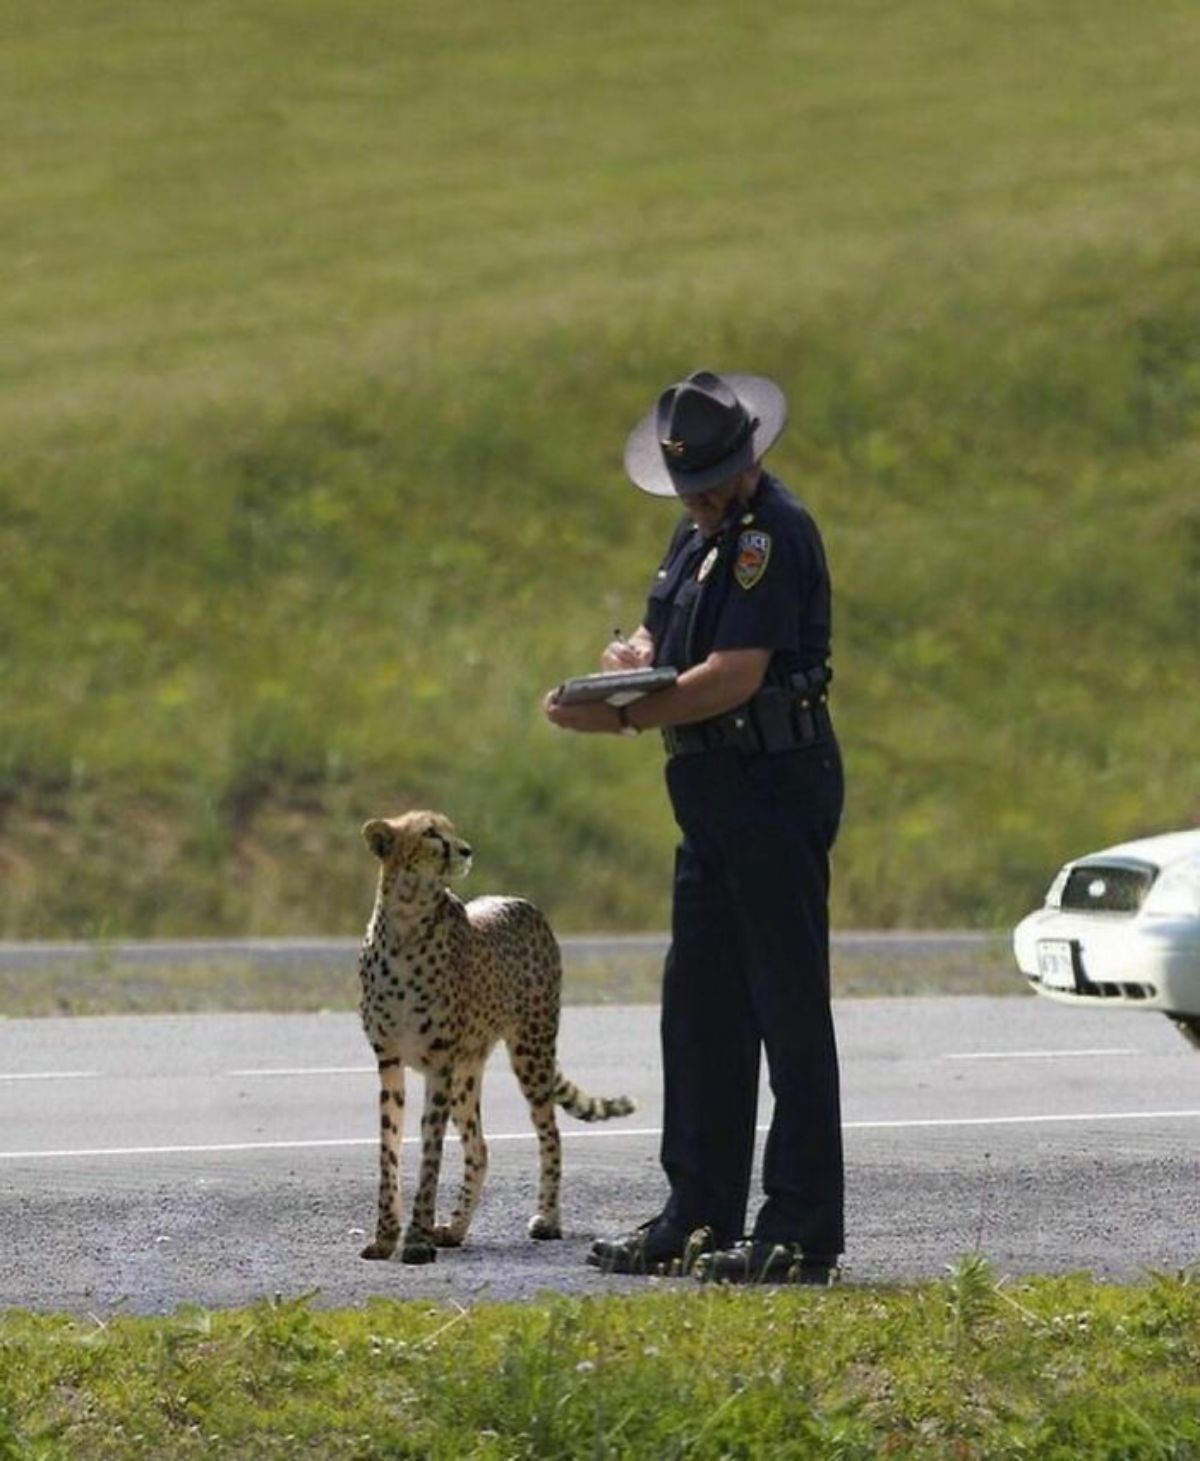 cheetah standing on the road next to a police officer in black writing on a clipboard